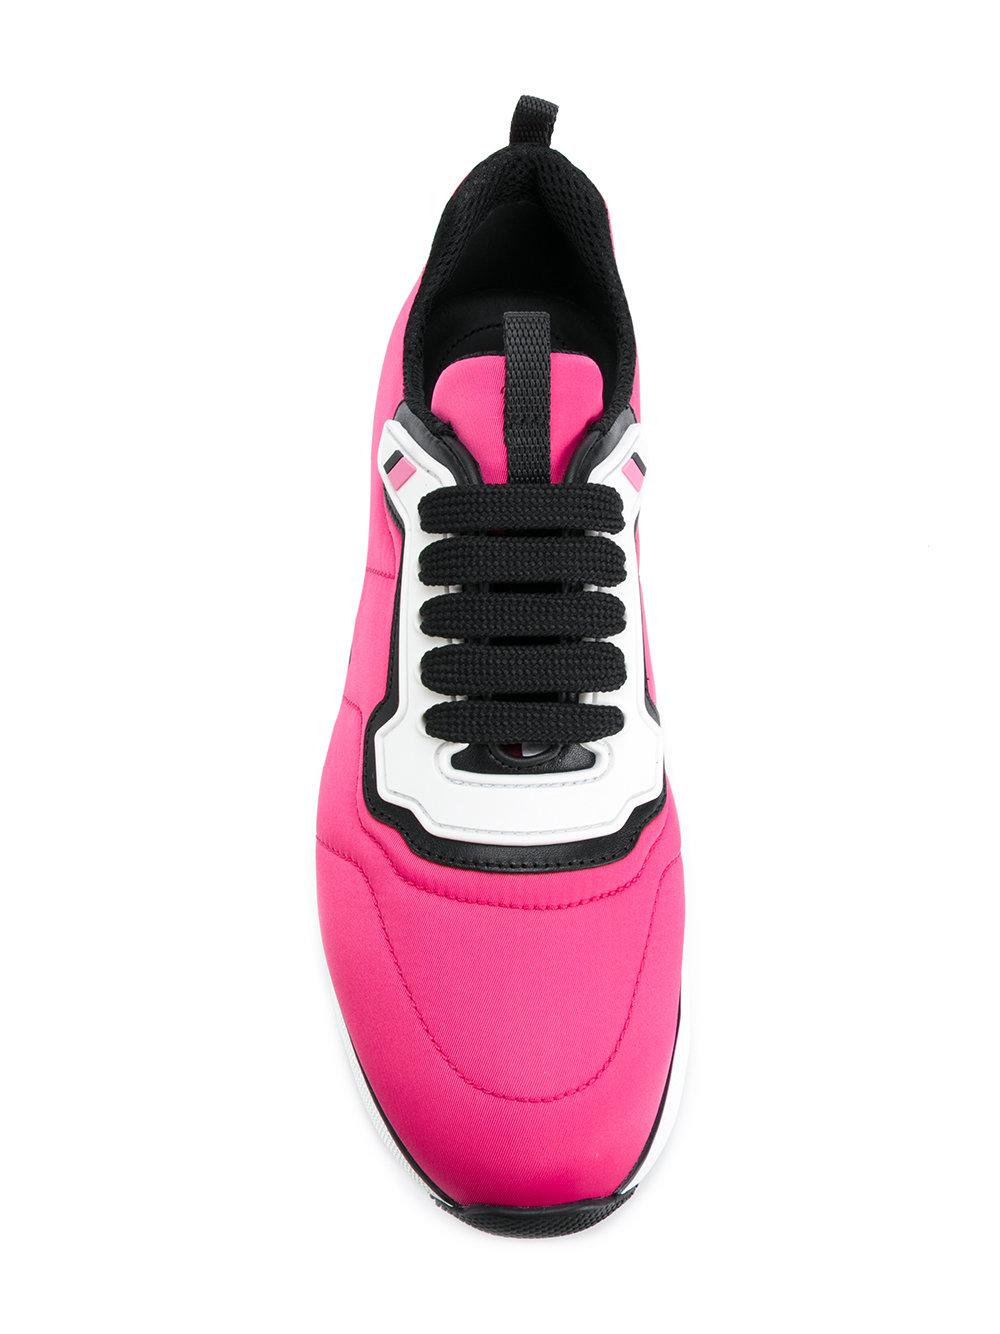 Prada Leather High Sole Sneakers in Pink & Purple (Pink) - Lyst